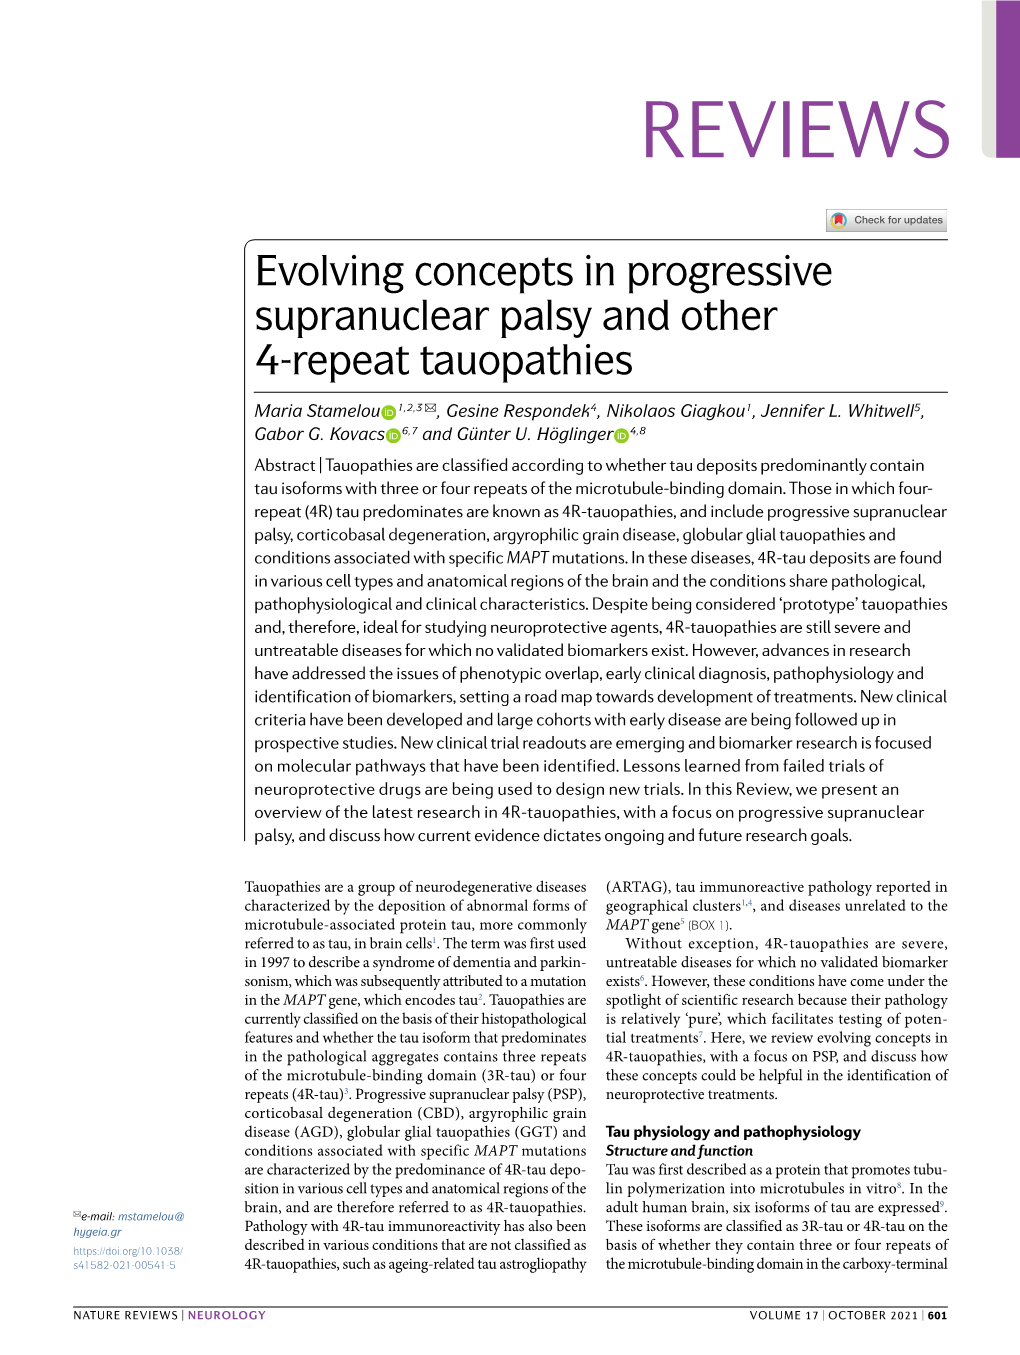 Evolving Concepts in Progressive Supranuclear Palsy and Other 4-​Repeat Tauopathies